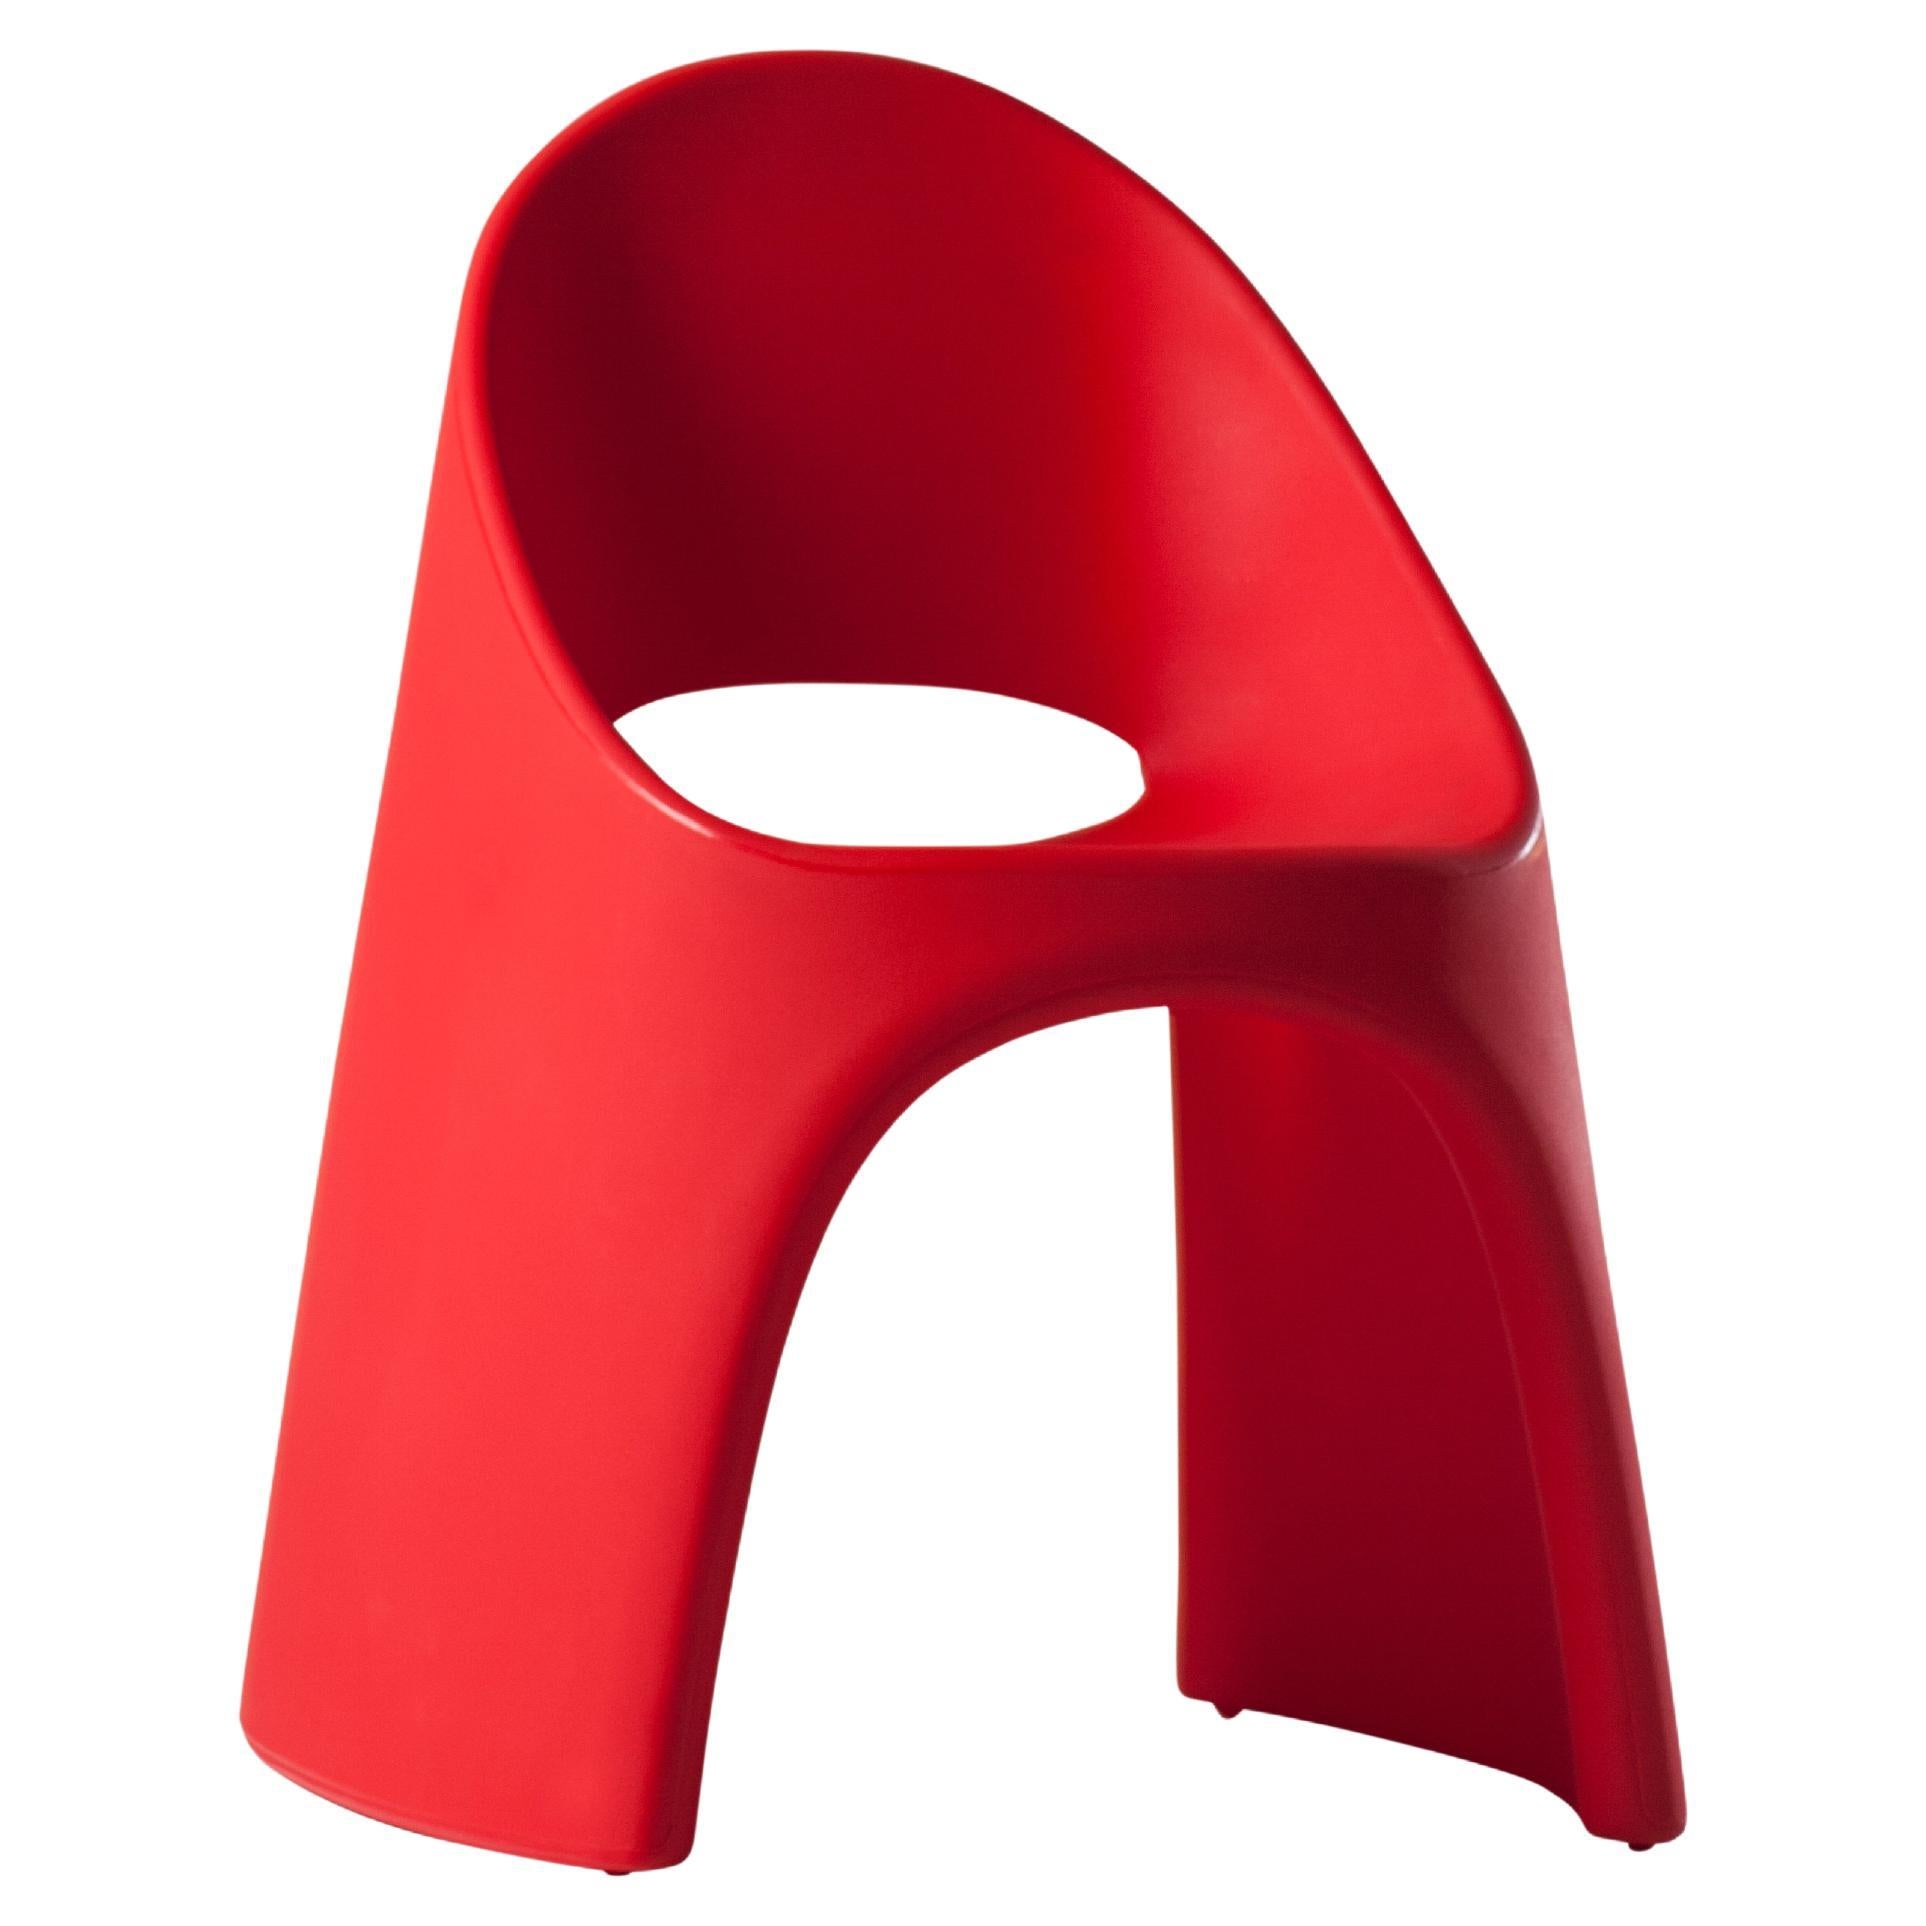 Slide Design Amélie Chair in Flame Red by Italo Pertichini